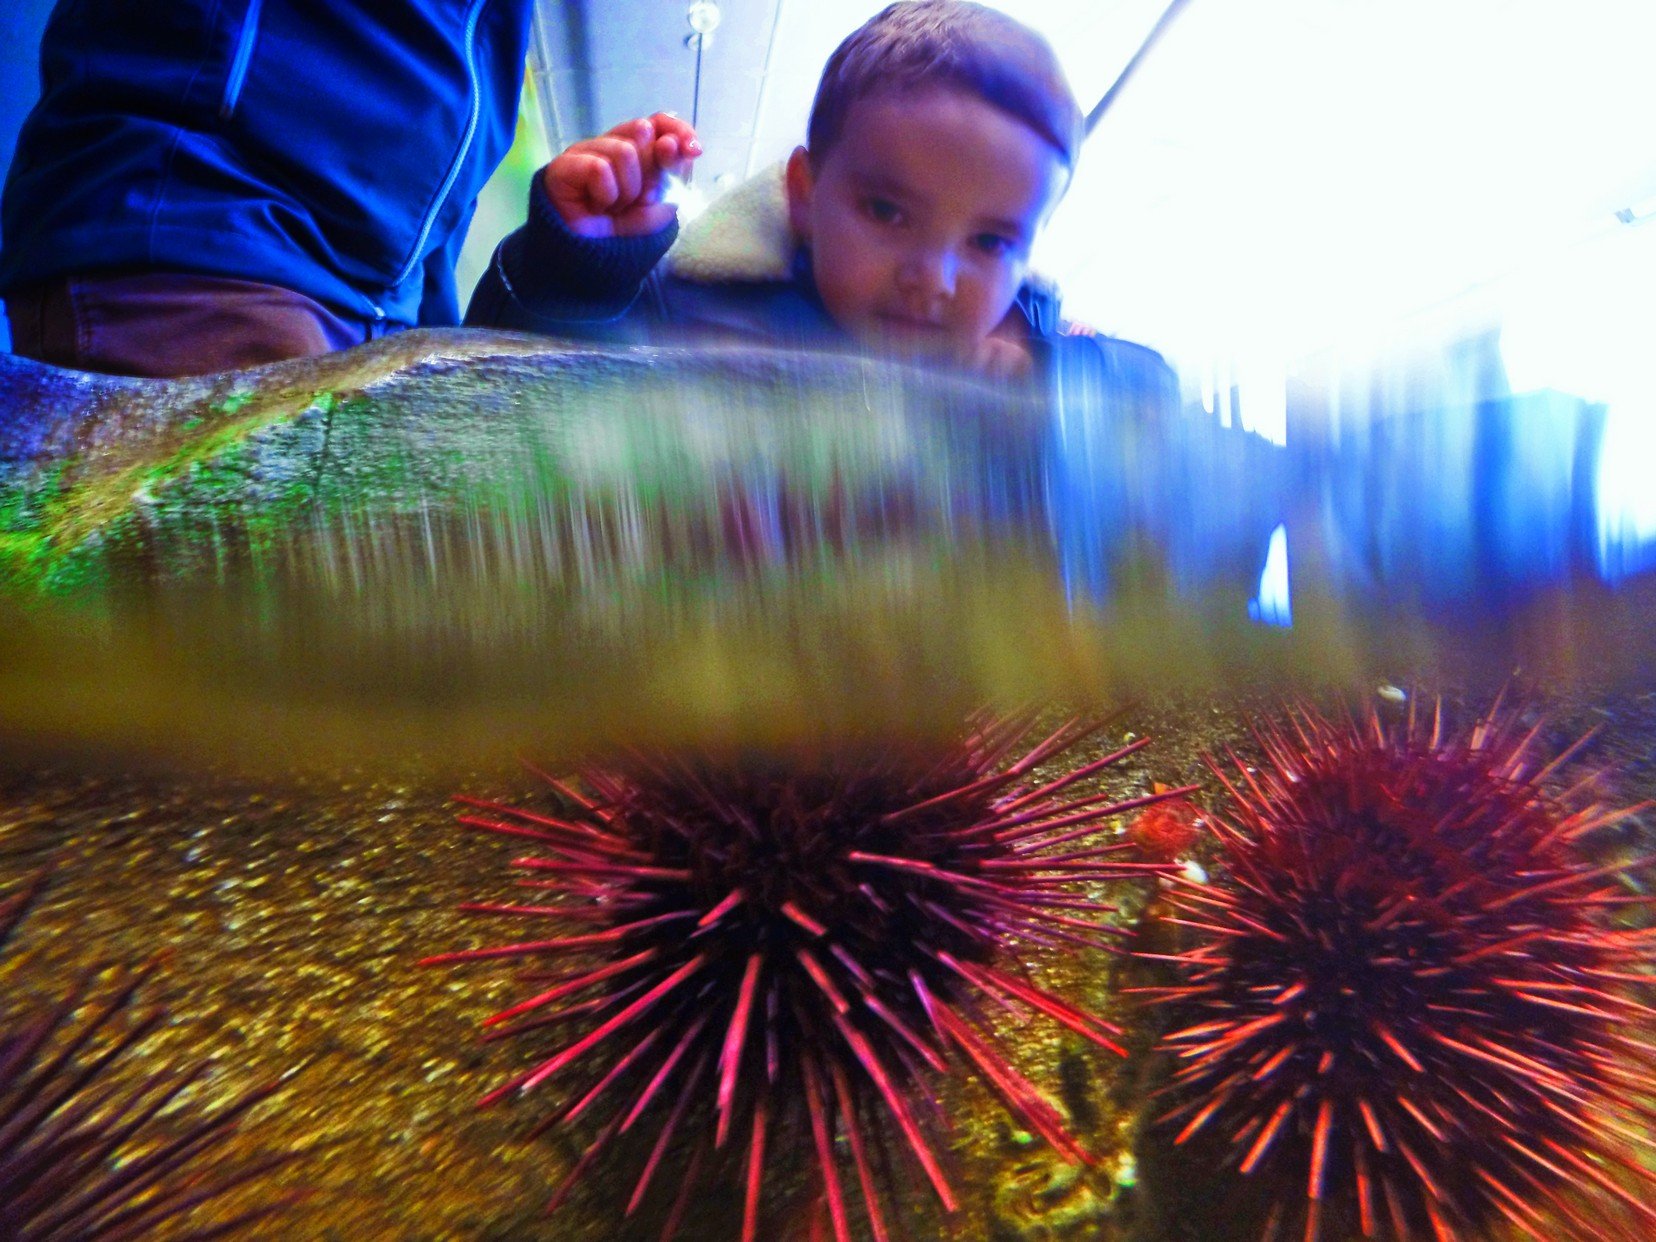 Local learning at the Port Townsend Marine Science Center